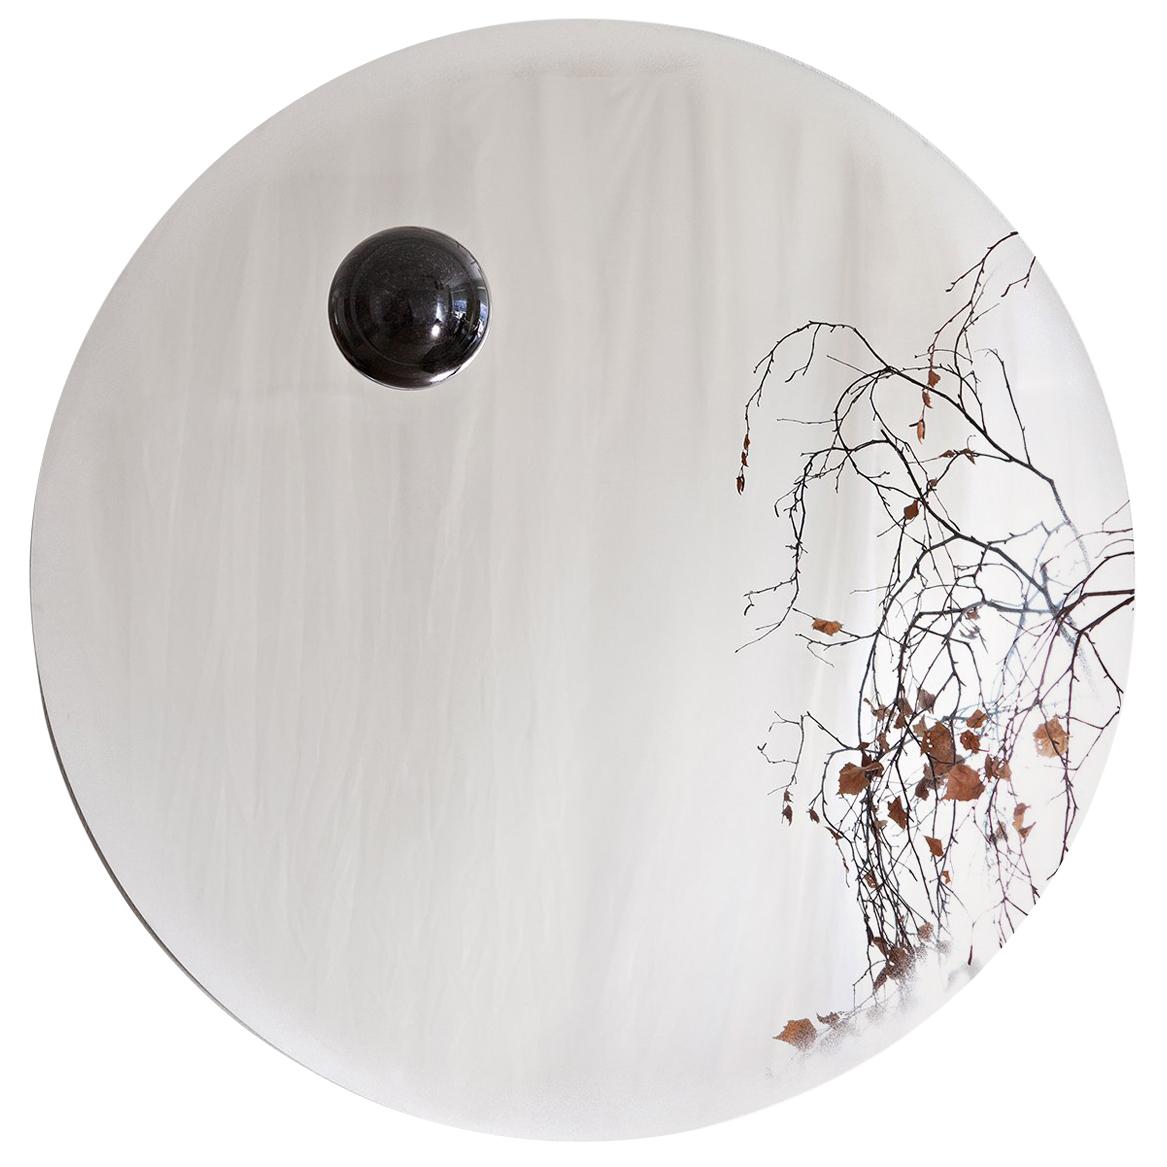 Contemporary Eclipse, Steel Mirror with a Diabase Stone im Angebot